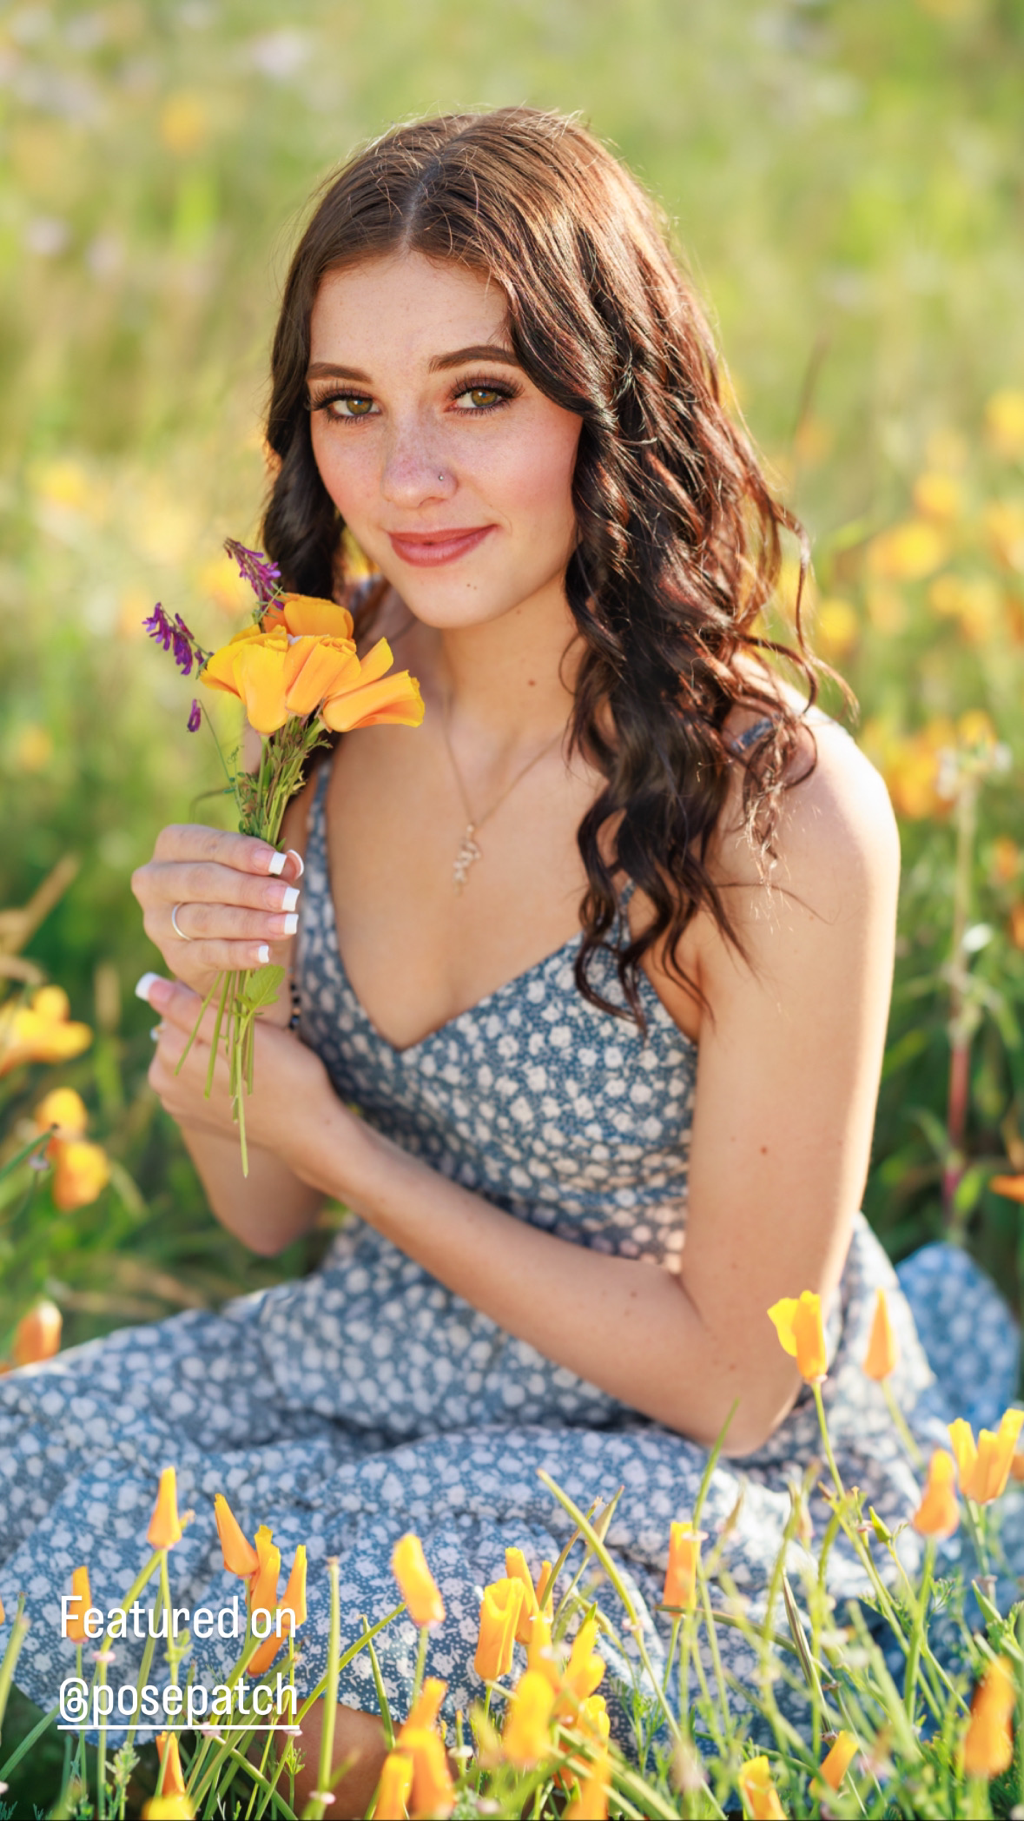 teenage girl in blue dress holding flowers and sitting in flower field